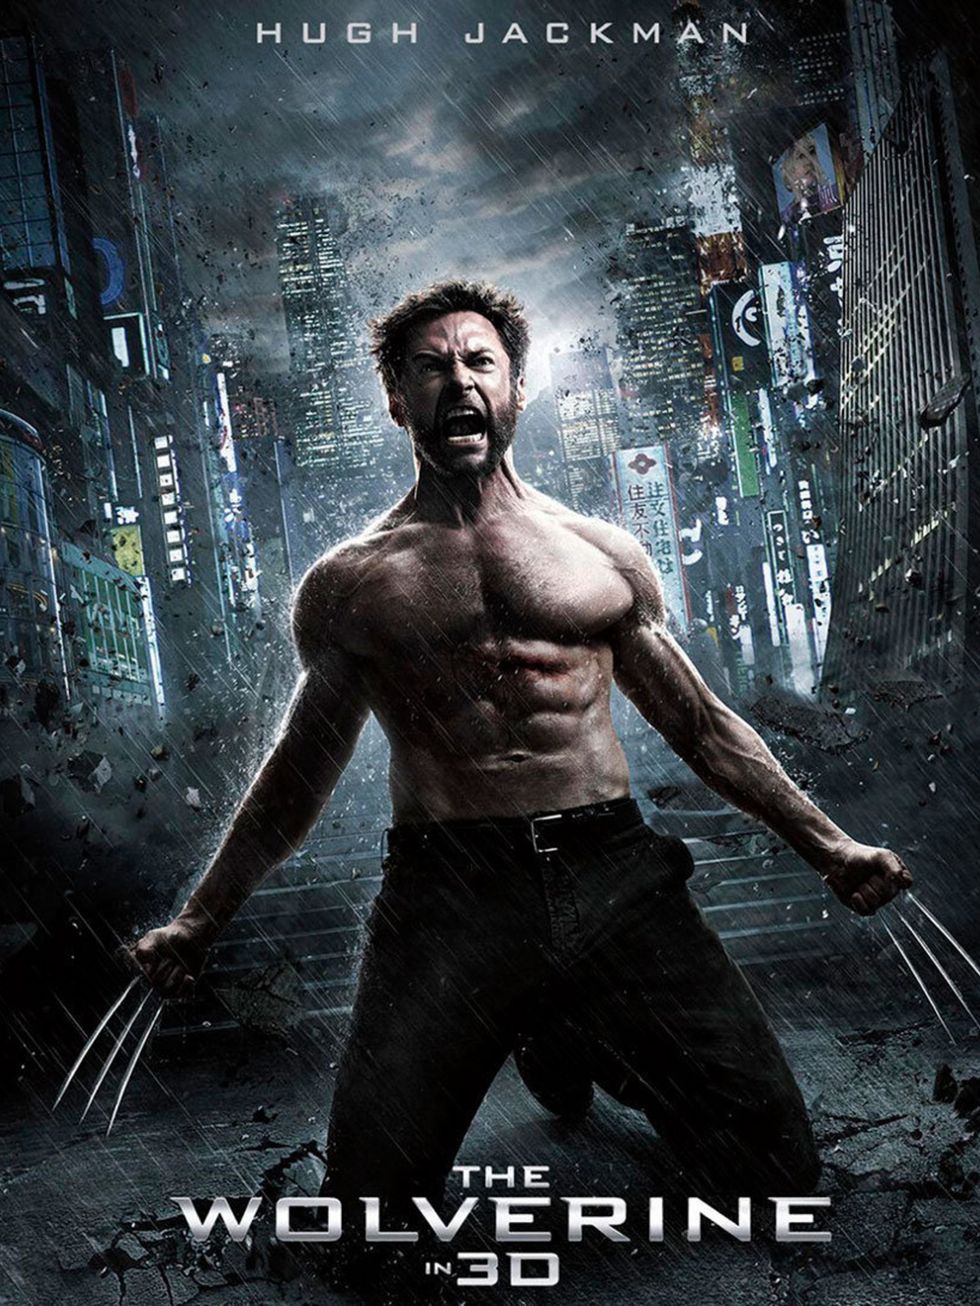 <p><strong>The Wolverine</strong></p><p>This time, Wolverine (Hugh Jackman) is surrounded by strong women. Friends Yukio and Mariko speak several times and Mariko takes on villain Viper at the end. A rare win for a superhero movie.</p><p>SCORE: 3/3</p><p>